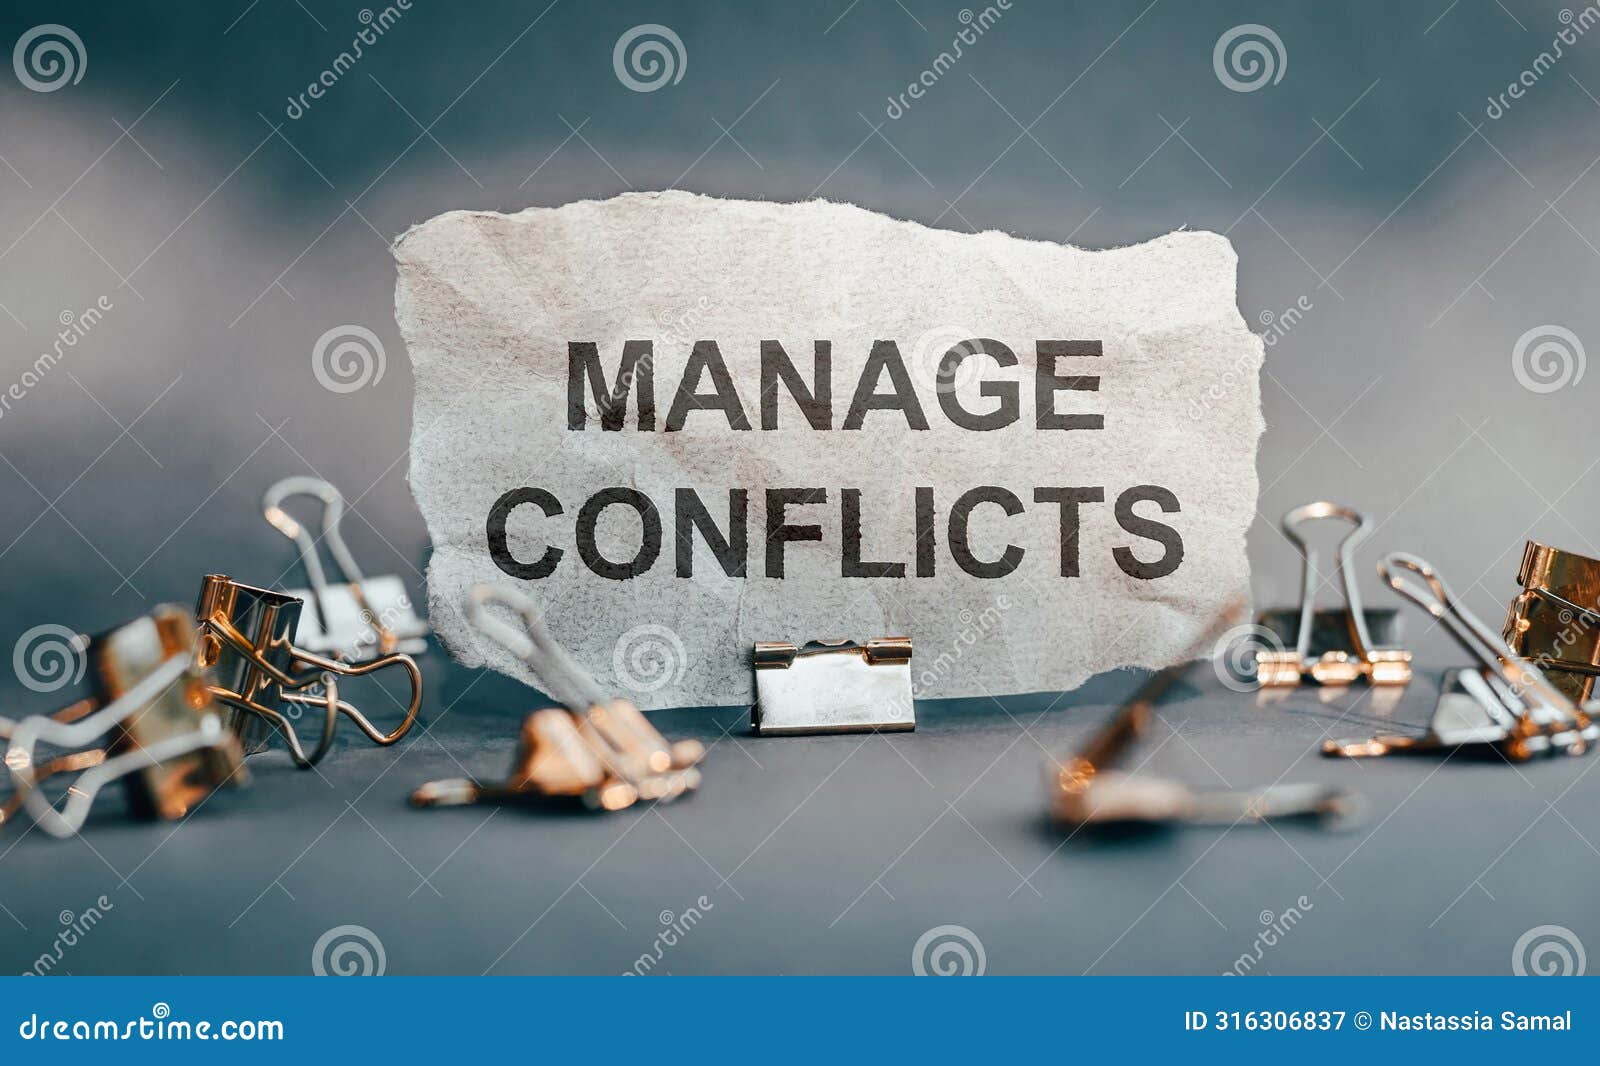 manage conflicts text on peace of paper